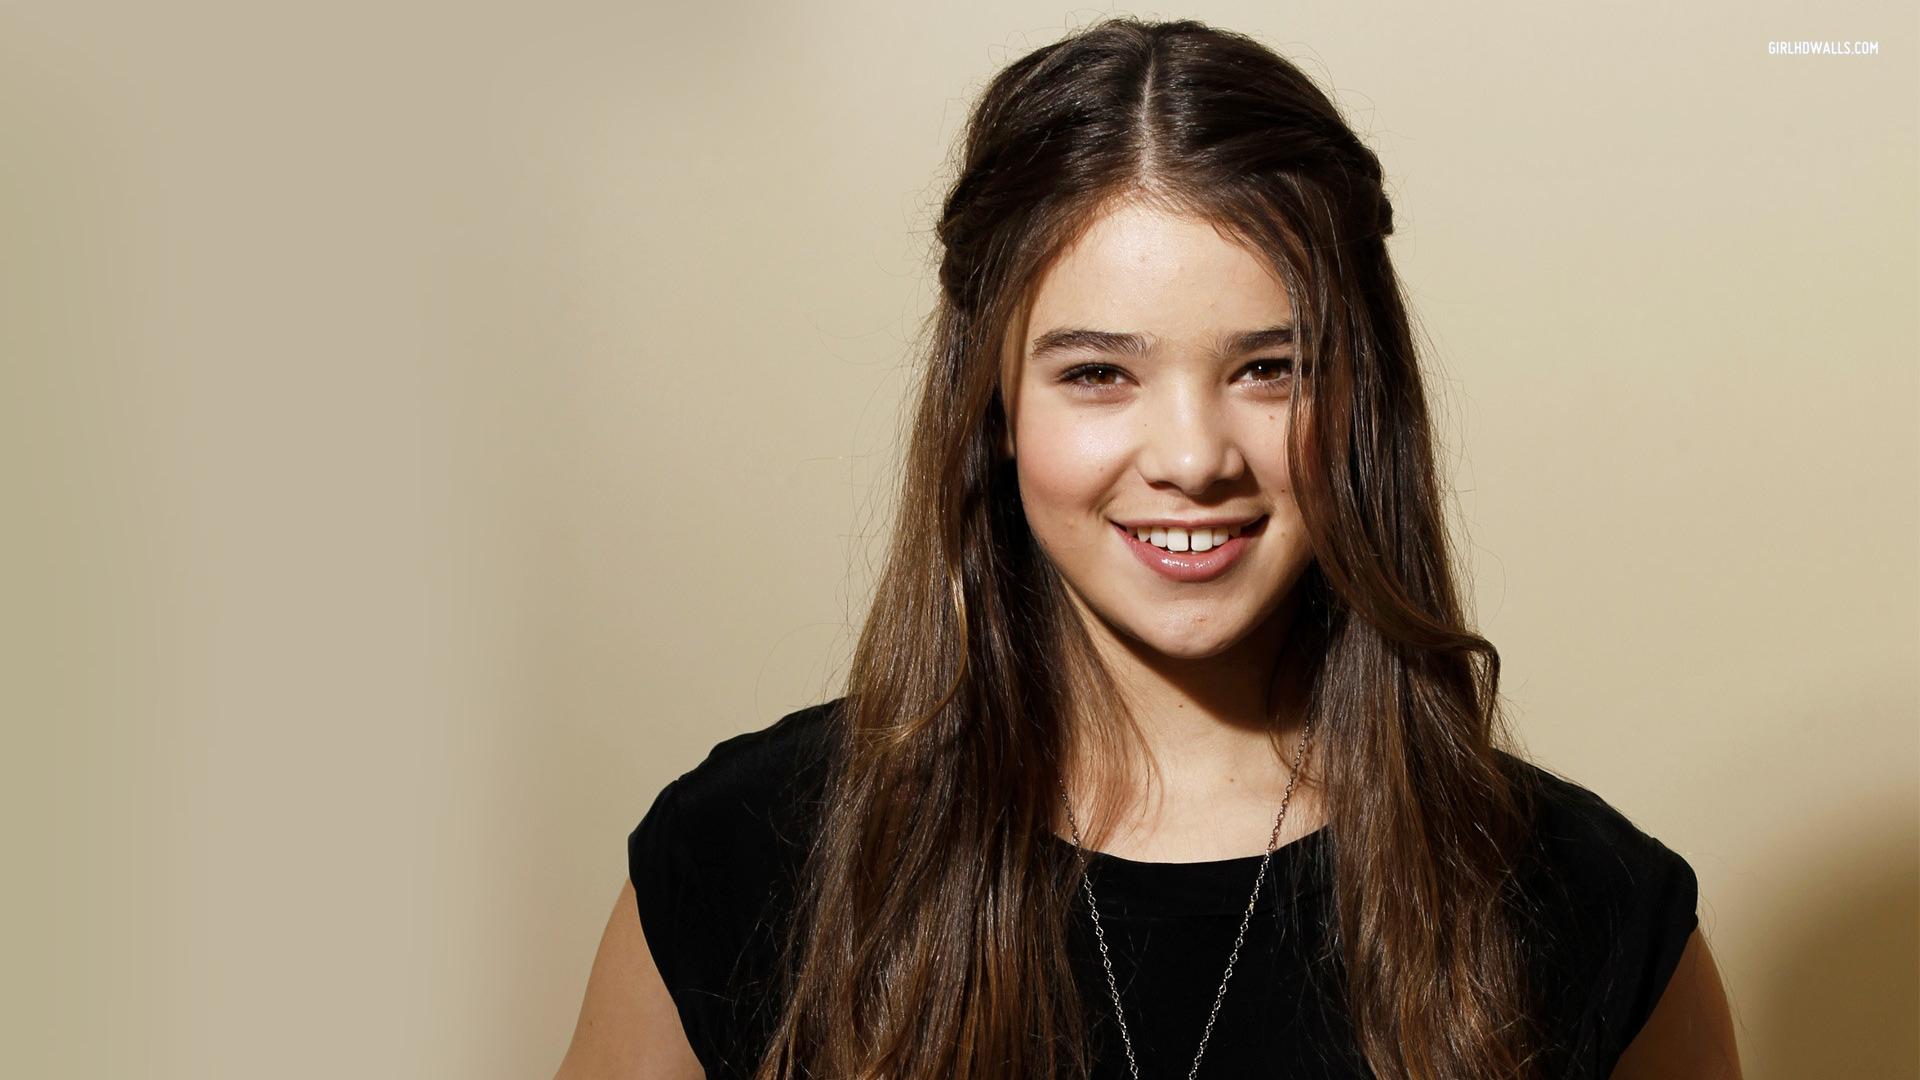 Hailee Steinfeld Pictures